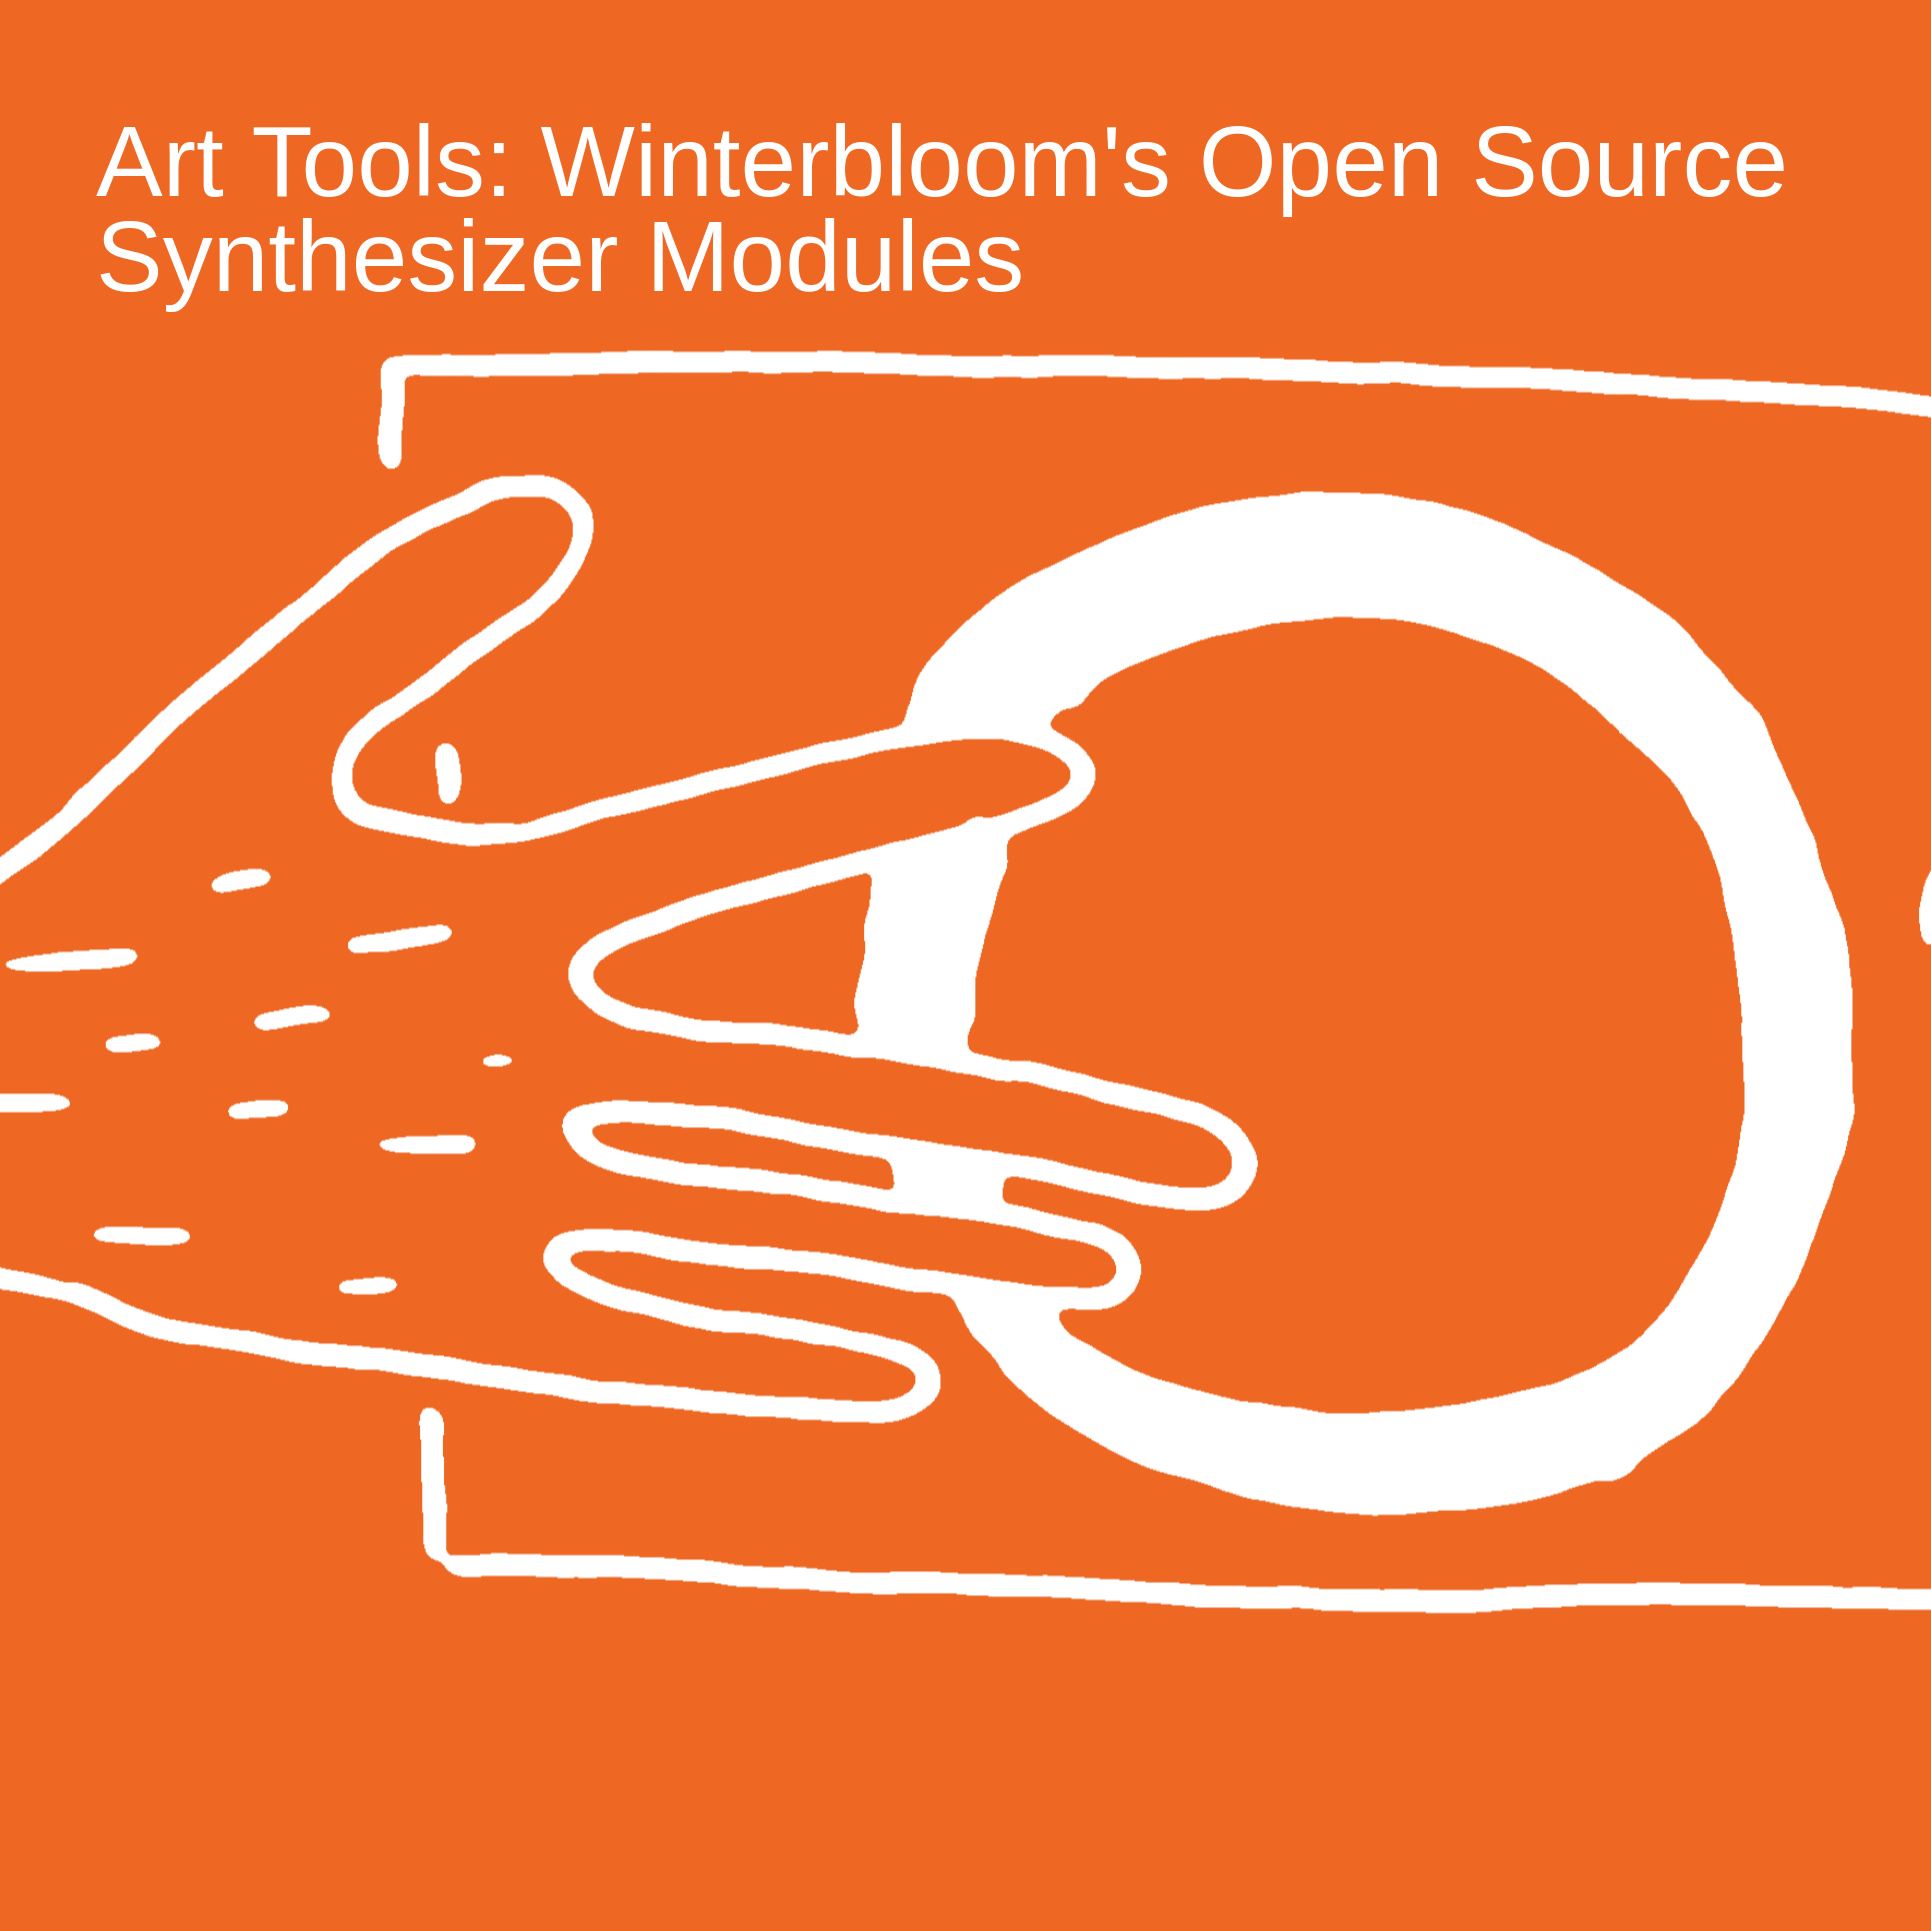 Art Tools: Winterbloom’s Open Source Synthesizer Modules